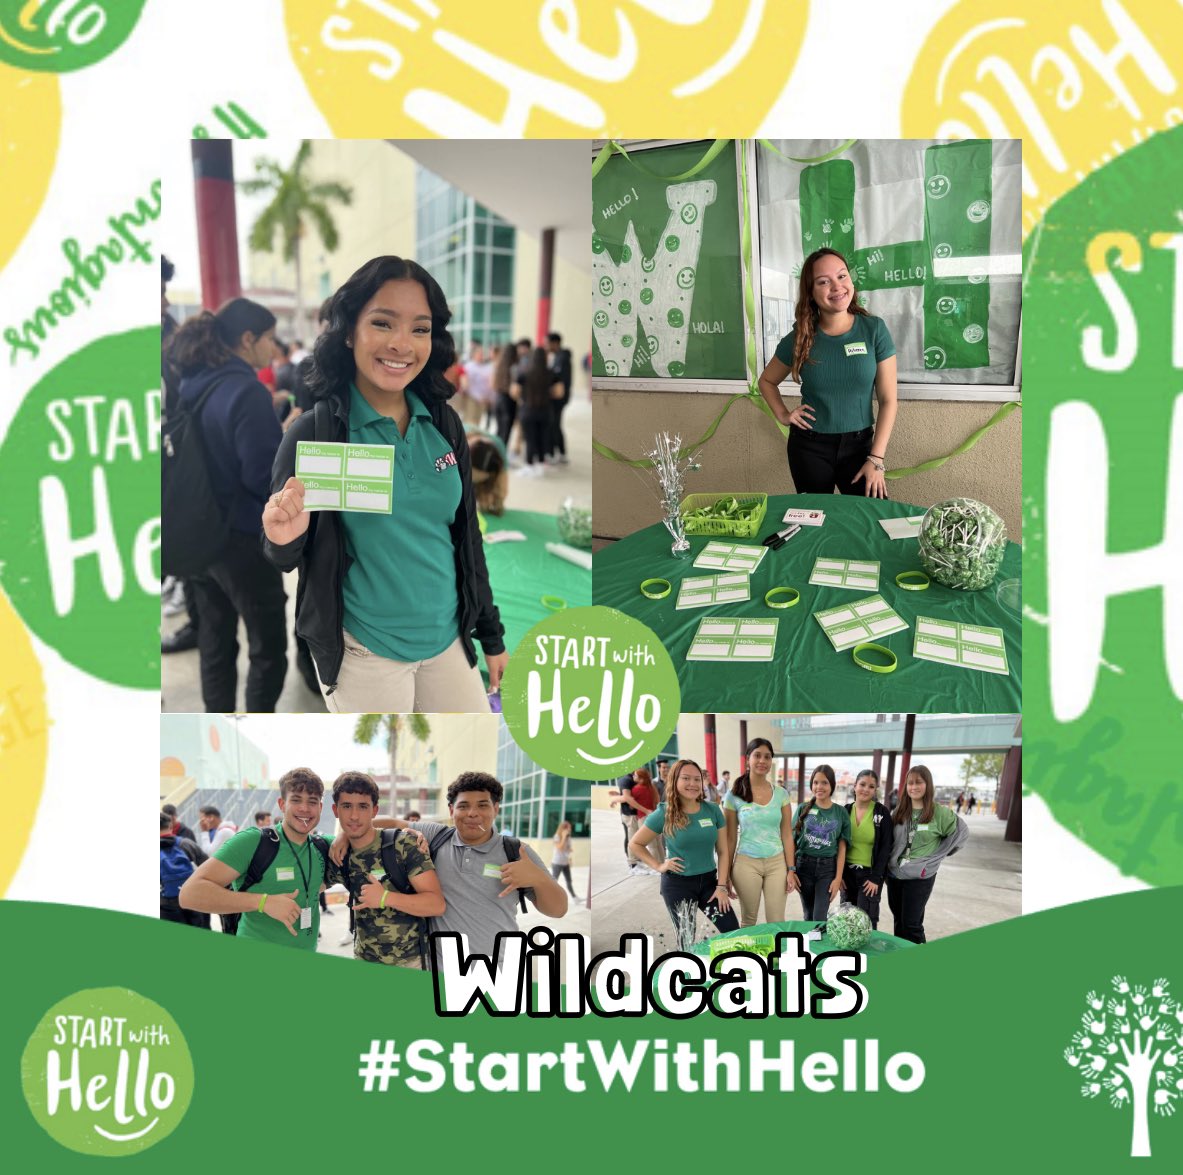 💚 Wildcats Start with Hello 💚 
This week we are supporting the @sandyhookpromise 💚💚💚

#sandyhook 
#endviolence
#safeschools
@miamischools 
@MDCPSNorth 
@SuptDotres 
@MDCPSPHantman